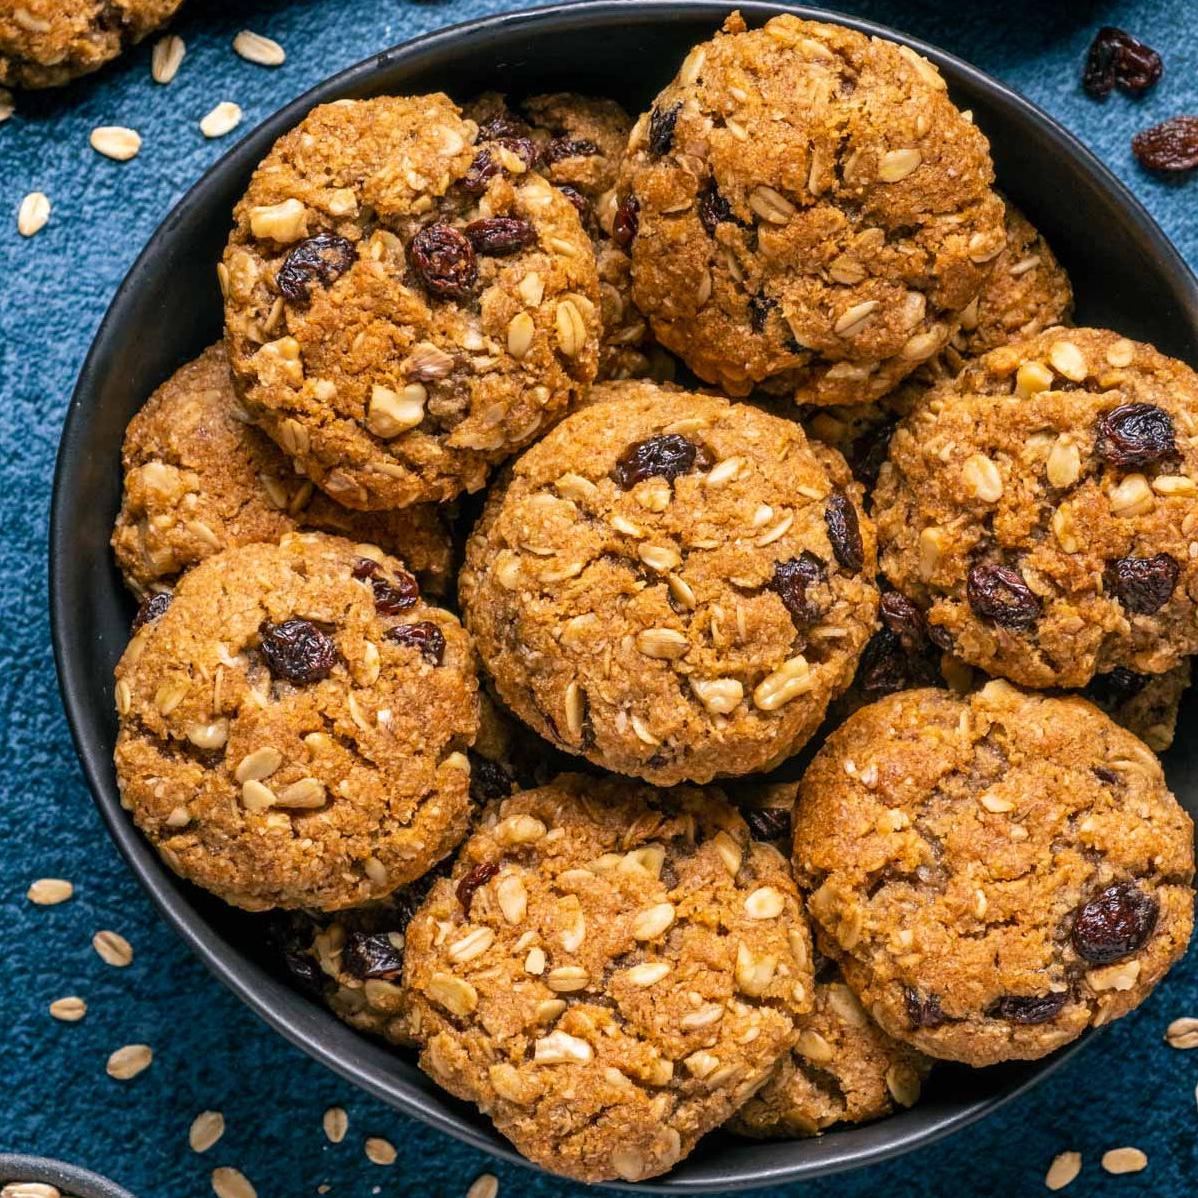  A classic cookie with a vegan twist, these oatmeal raisin cookies are sure to please everyone.